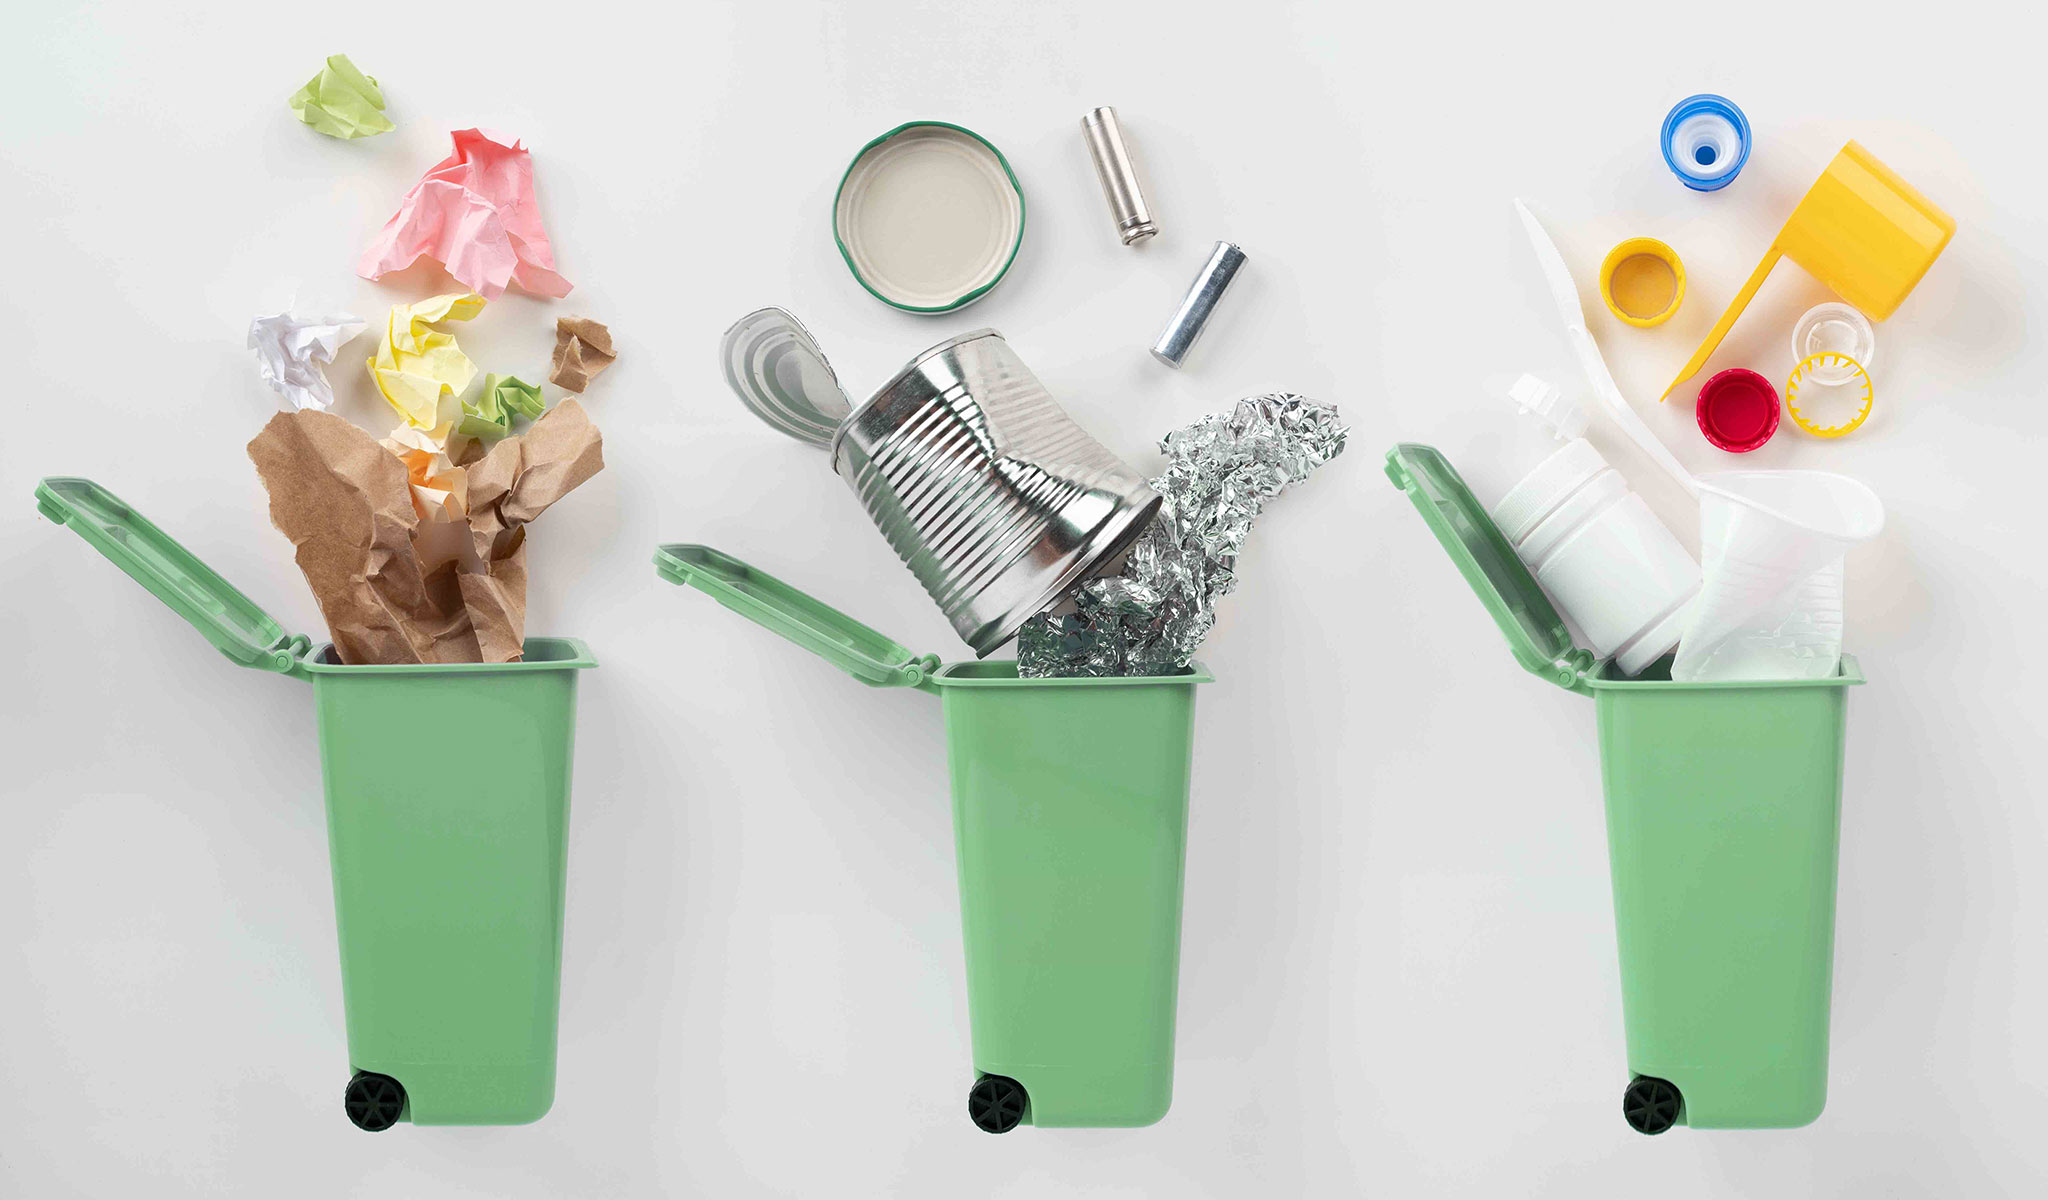 Plastic, metal or glass: What's the best material for a reusable